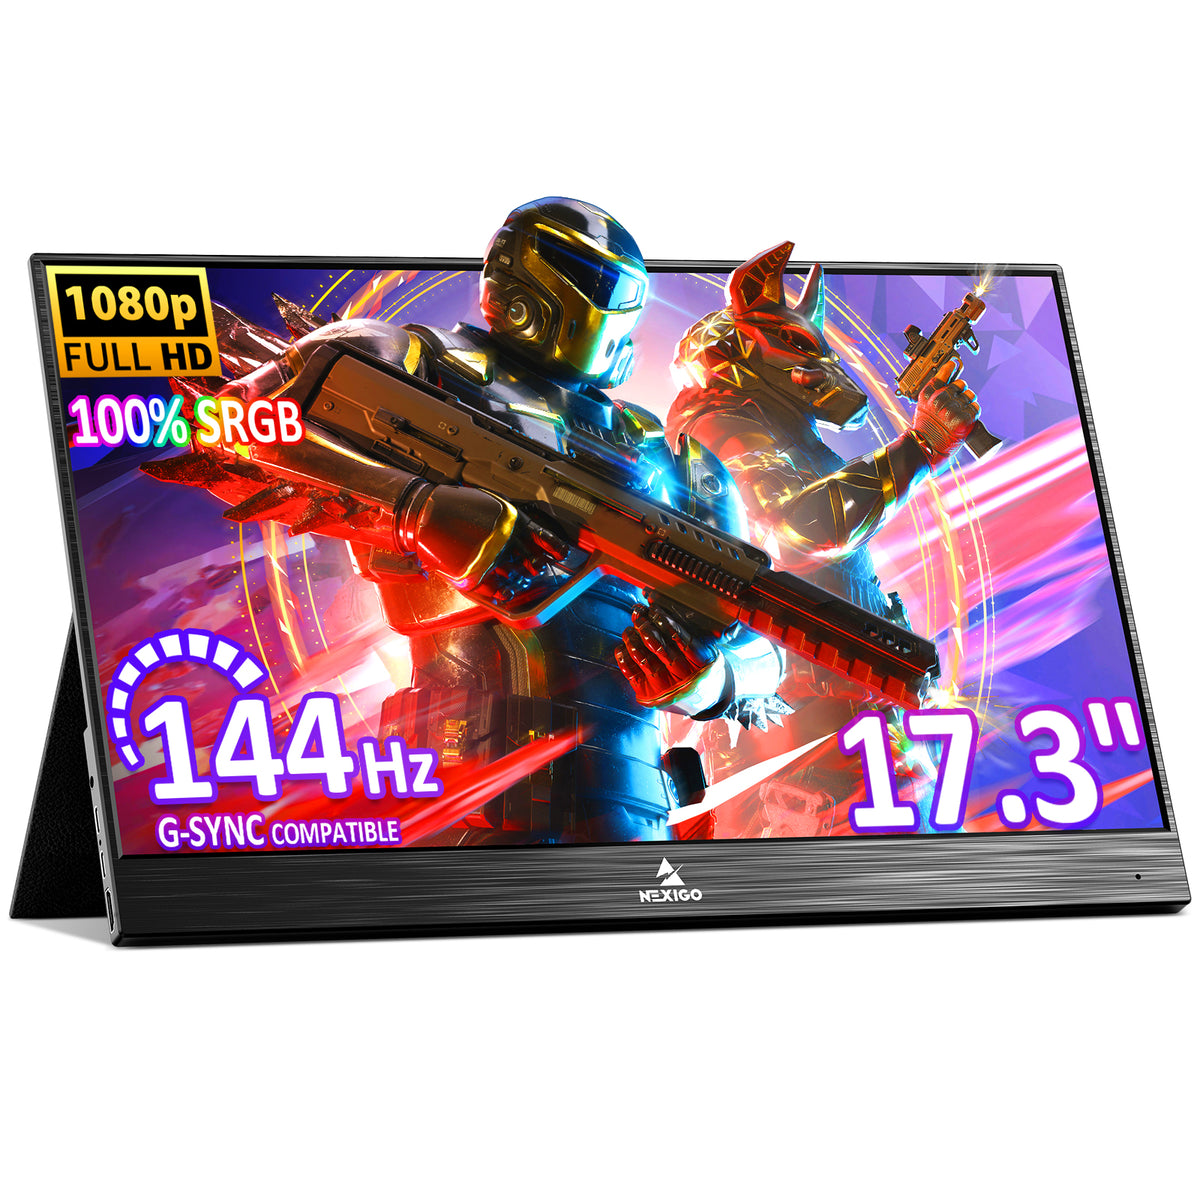 🚀 PORTABLE Monitor in 4k 🚀 Connect everything you want